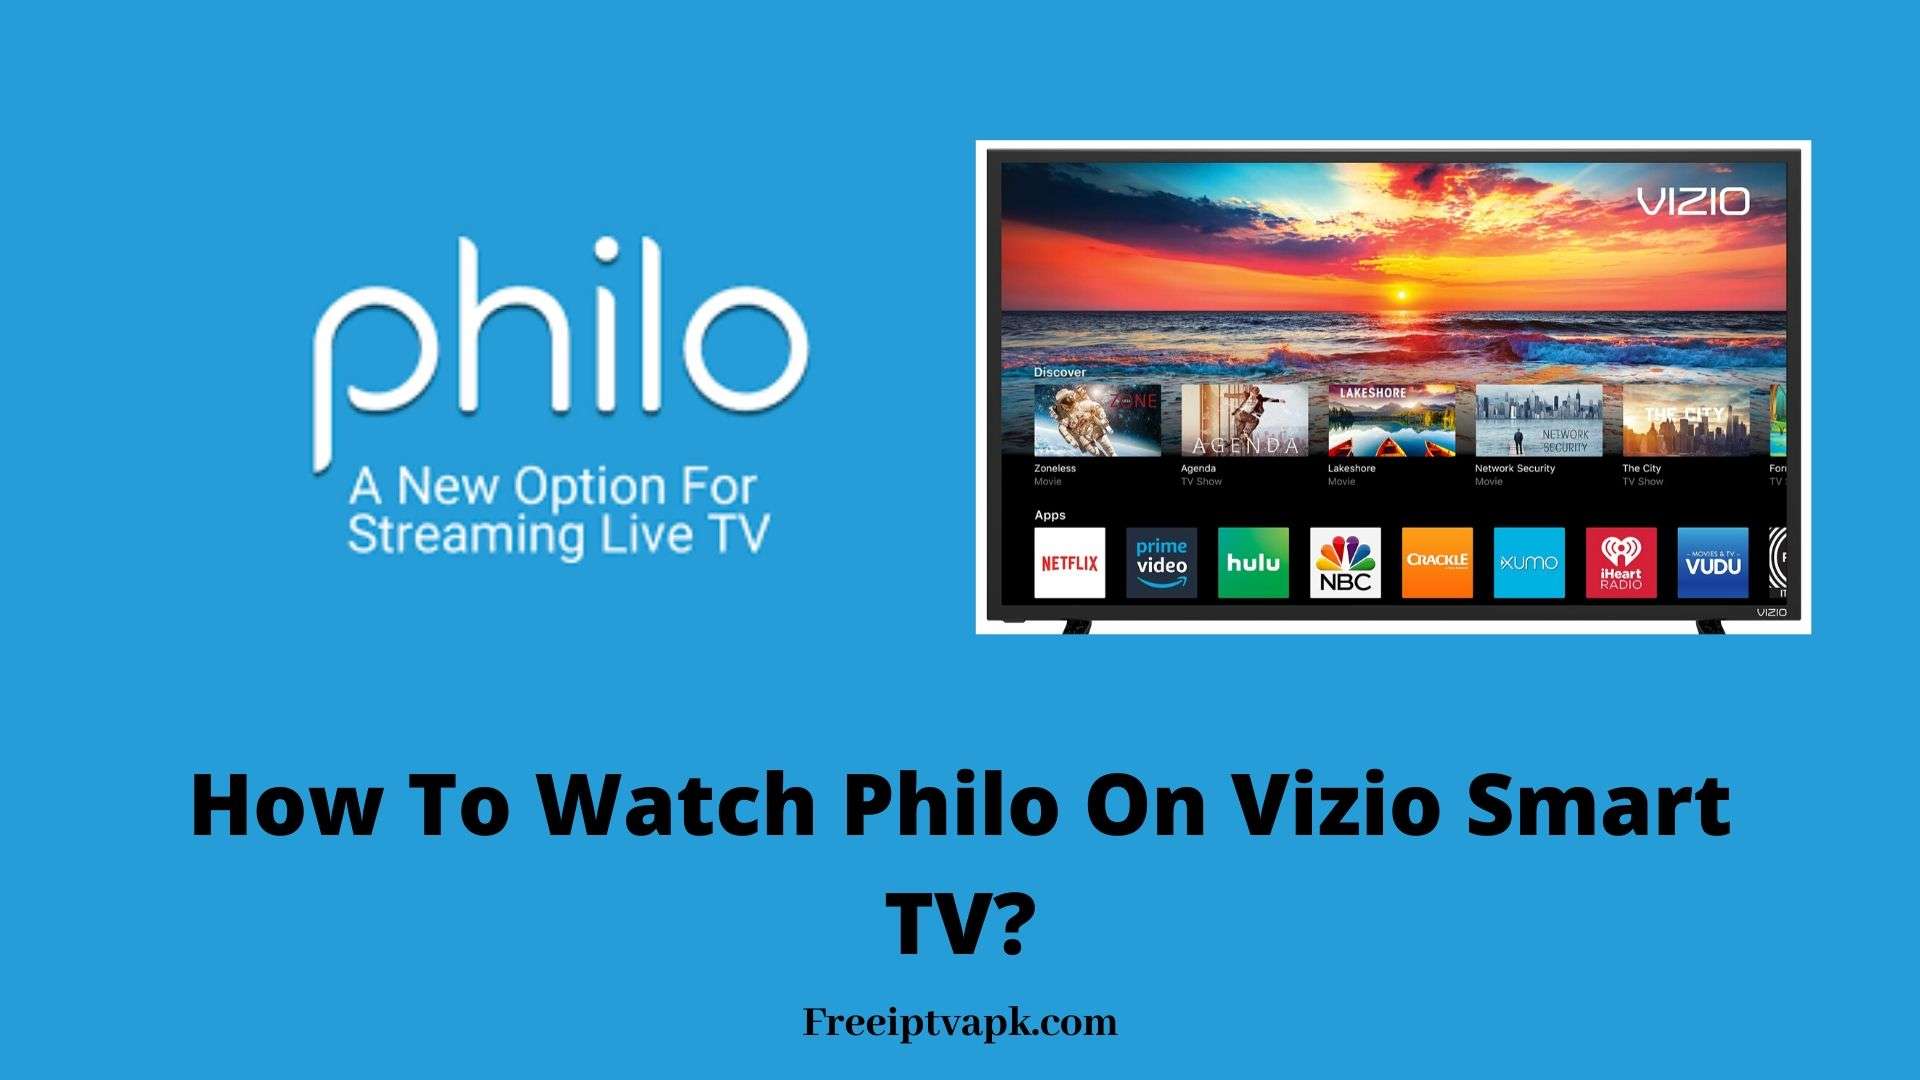 How To Watch Philo On Vizio Smart TV? [Updated Guide]